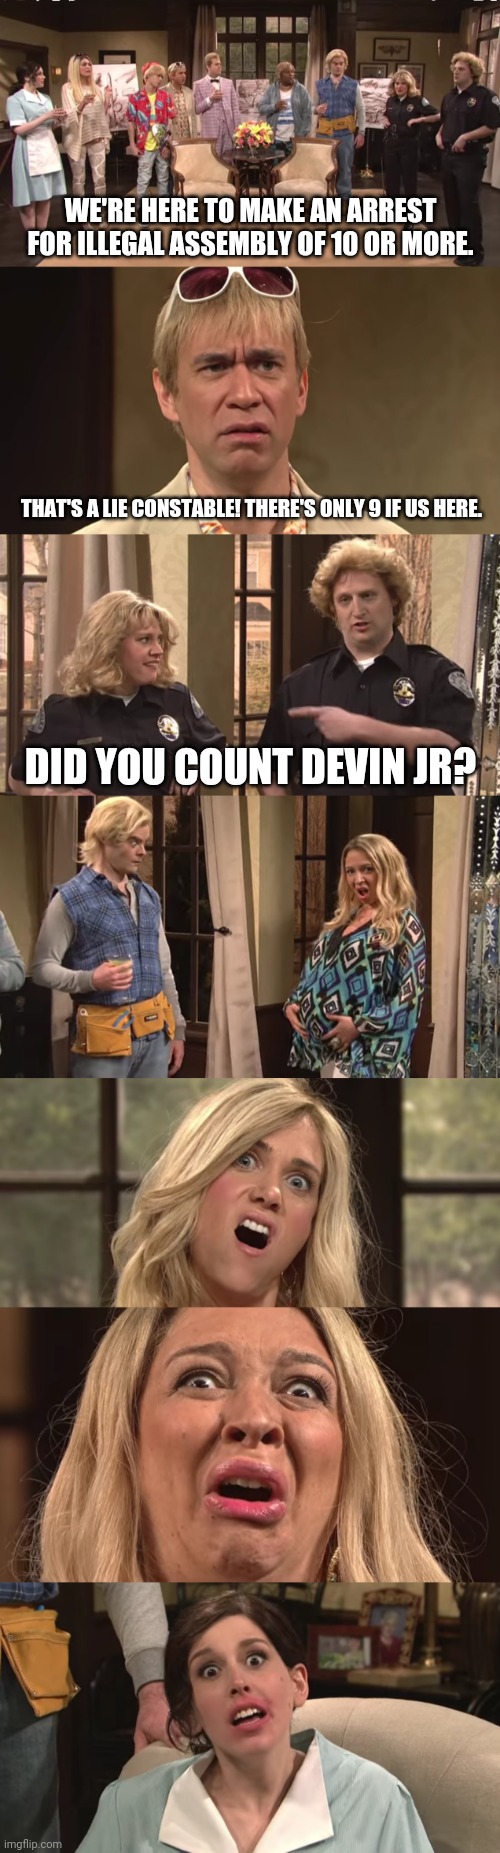 Devin Jr | WE'RE HERE TO MAKE AN ARREST FOR ILLEGAL ASSEMBLY OF 10 OR MORE. THAT'S A LIE CONSTABLE! THERE'S ONLY 9 IF US HERE. DID YOU COUNT DEVIN JR? | image tagged in funny memes | made w/ Imgflip meme maker